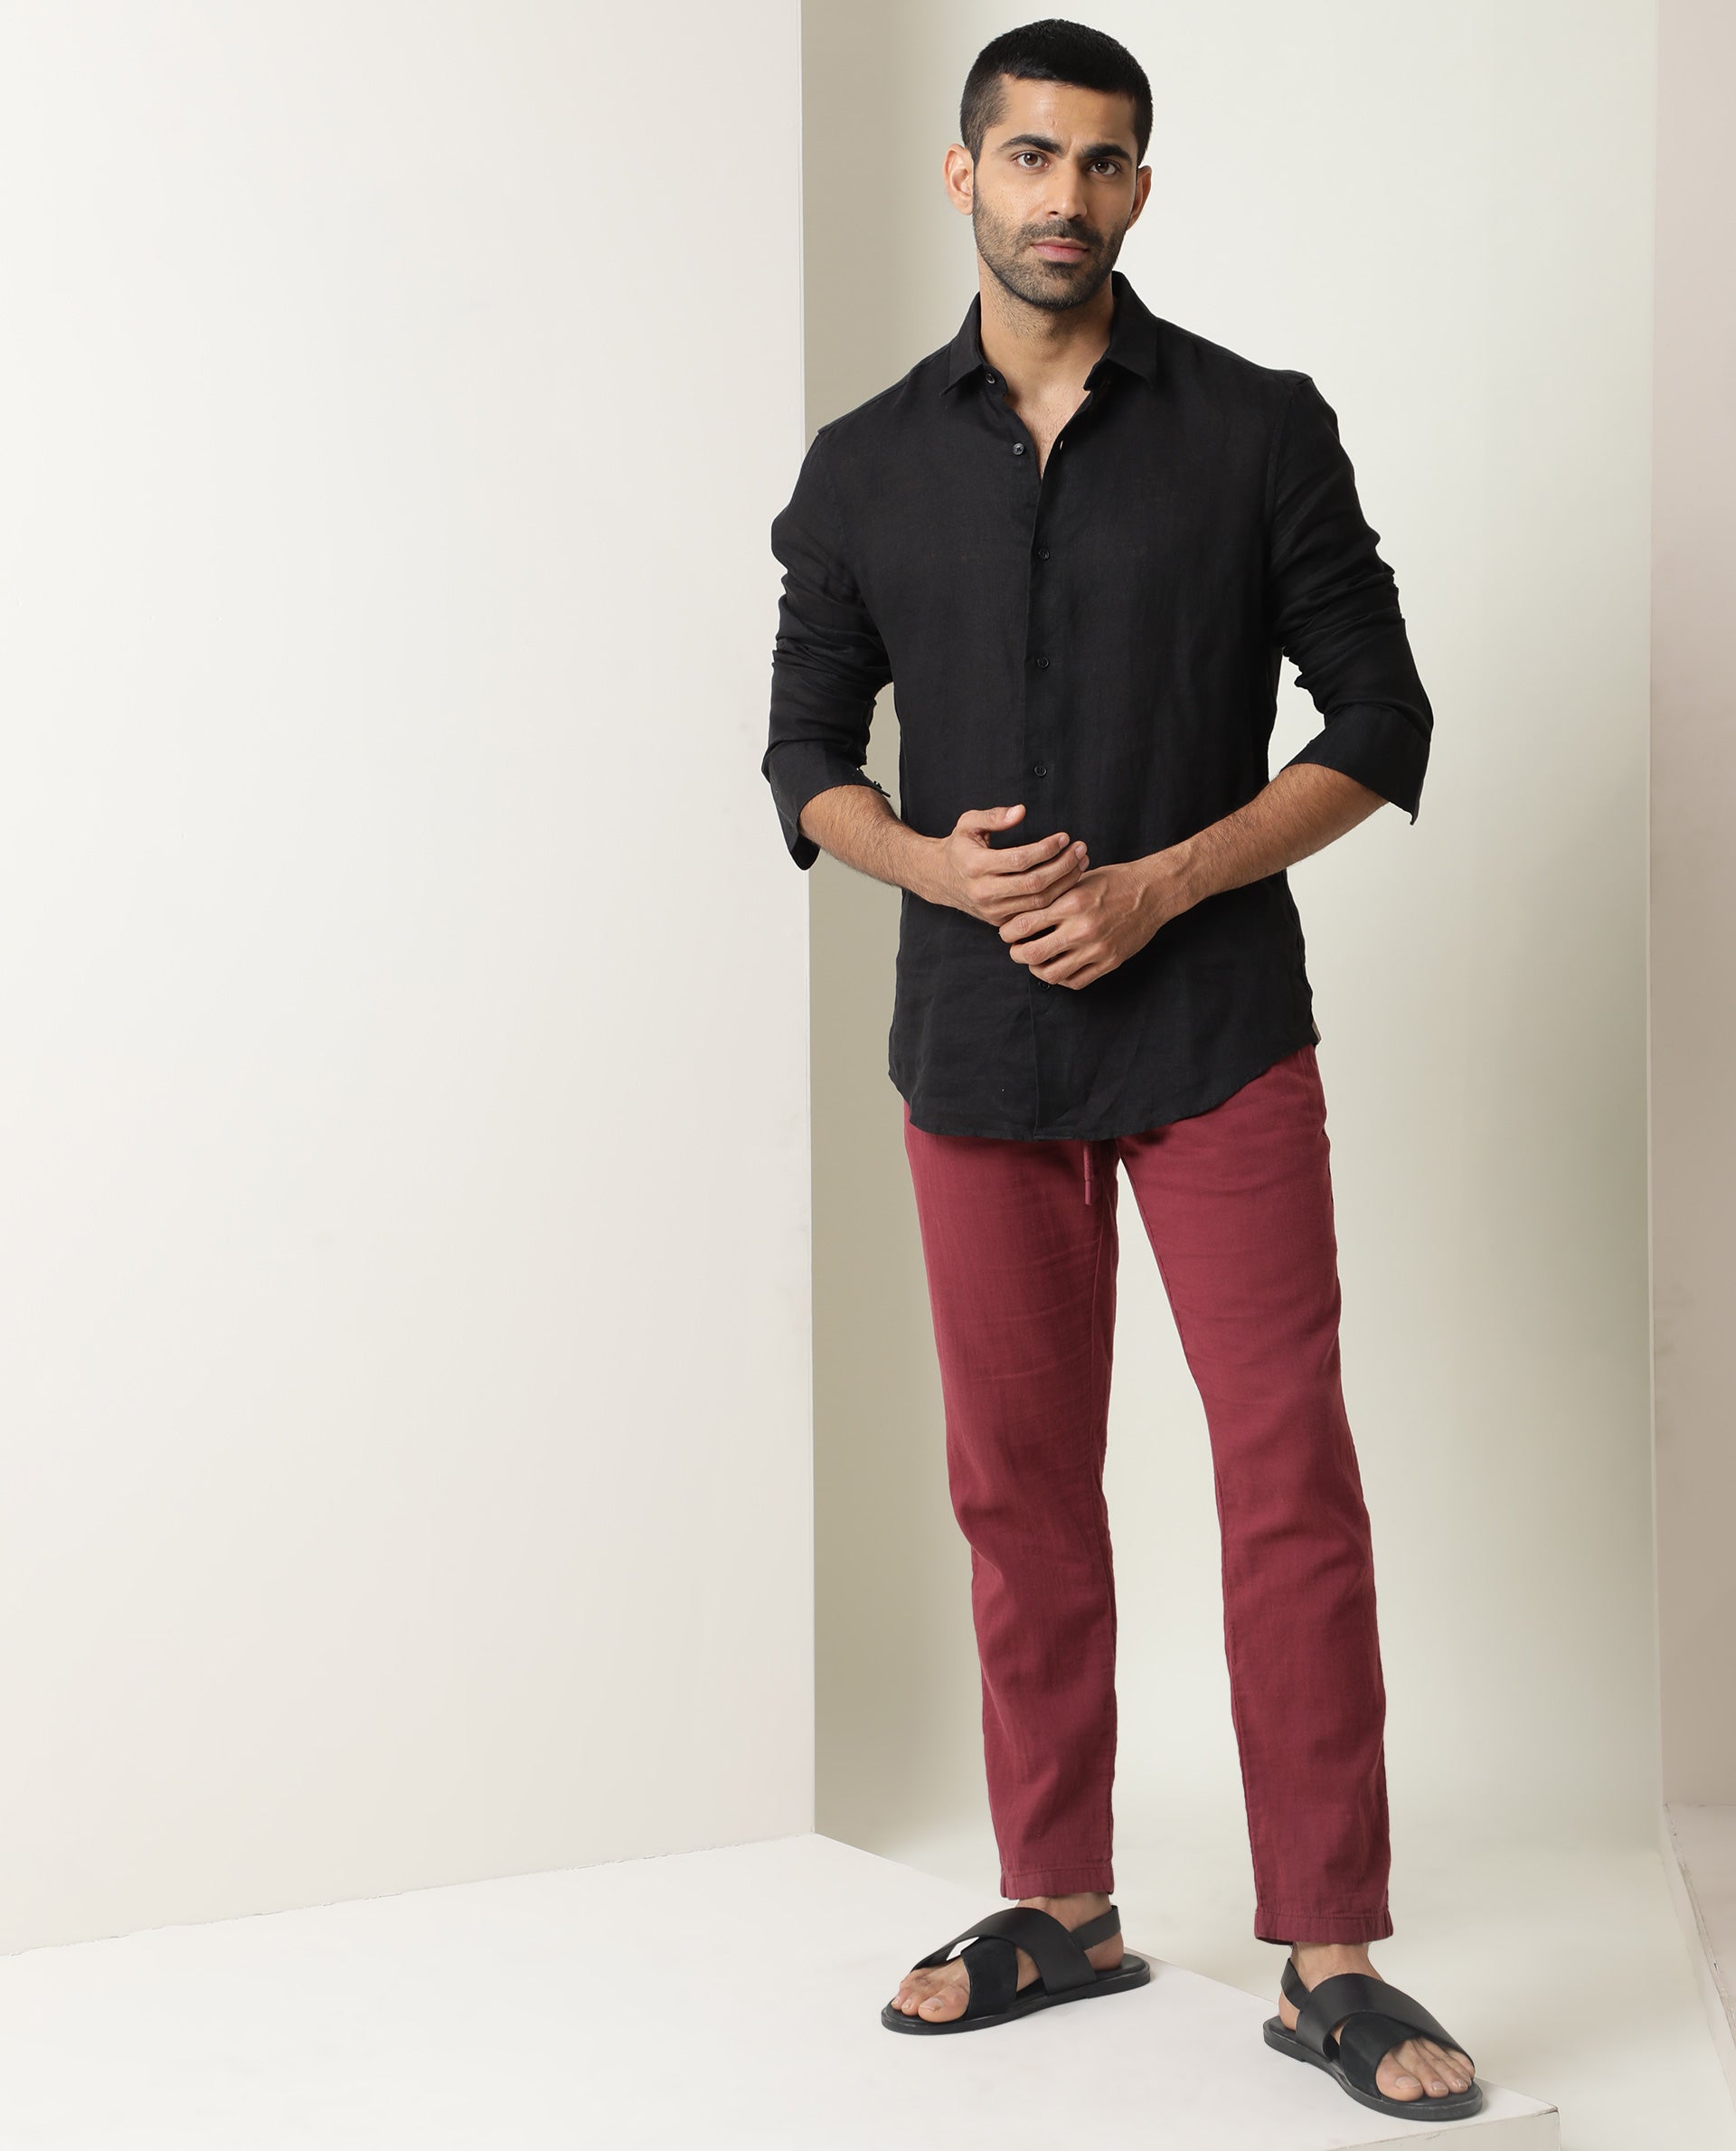 Would a red shirt look good with red pants? - Quora